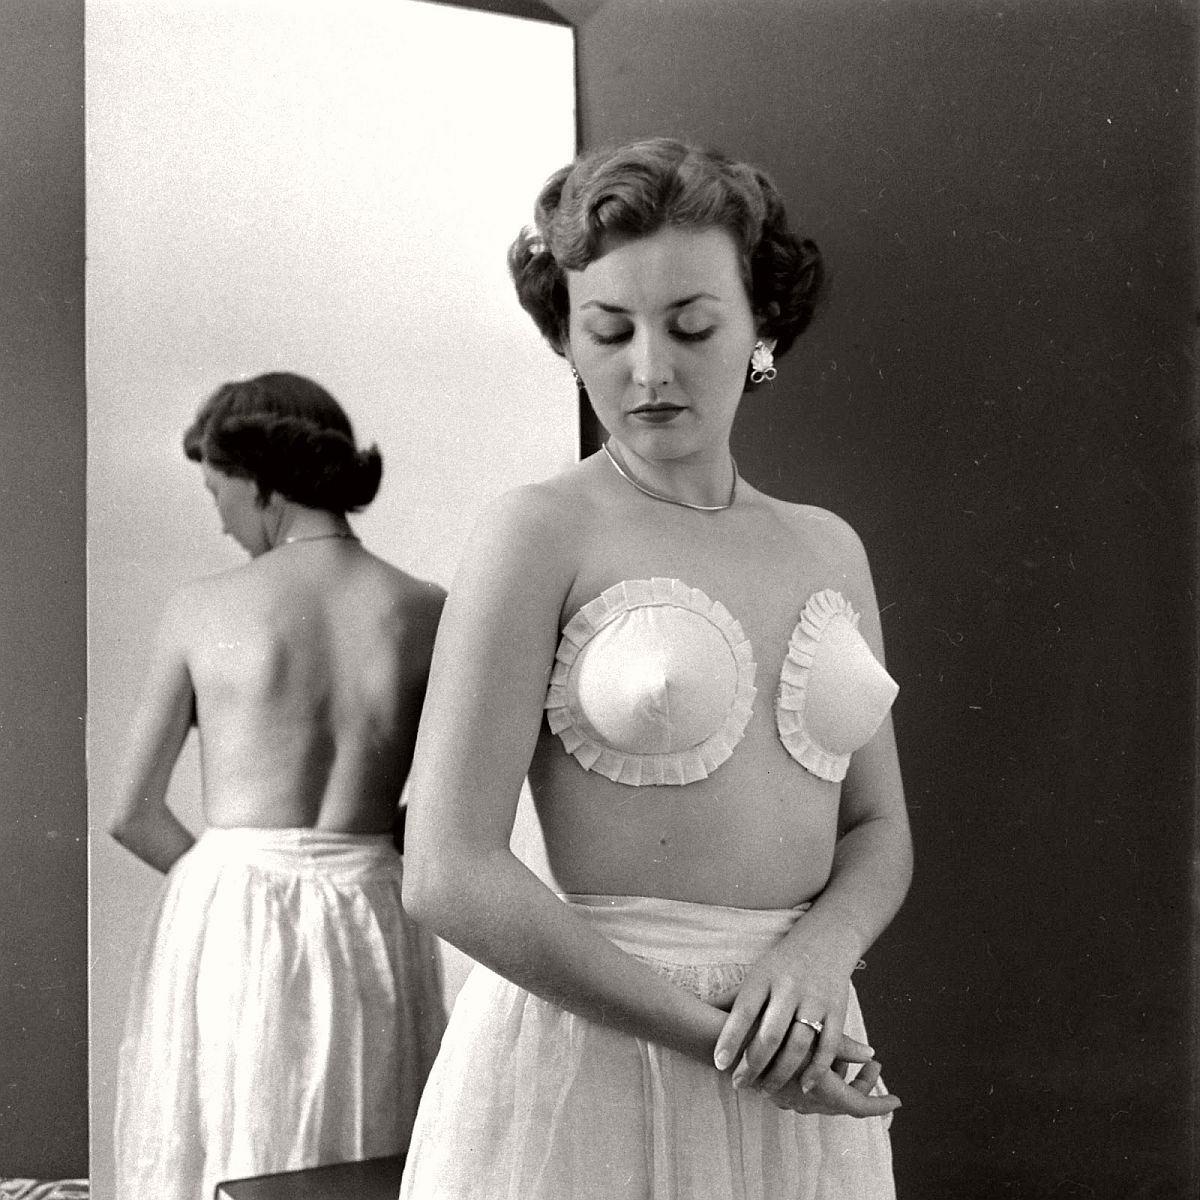 Who invented the bra?